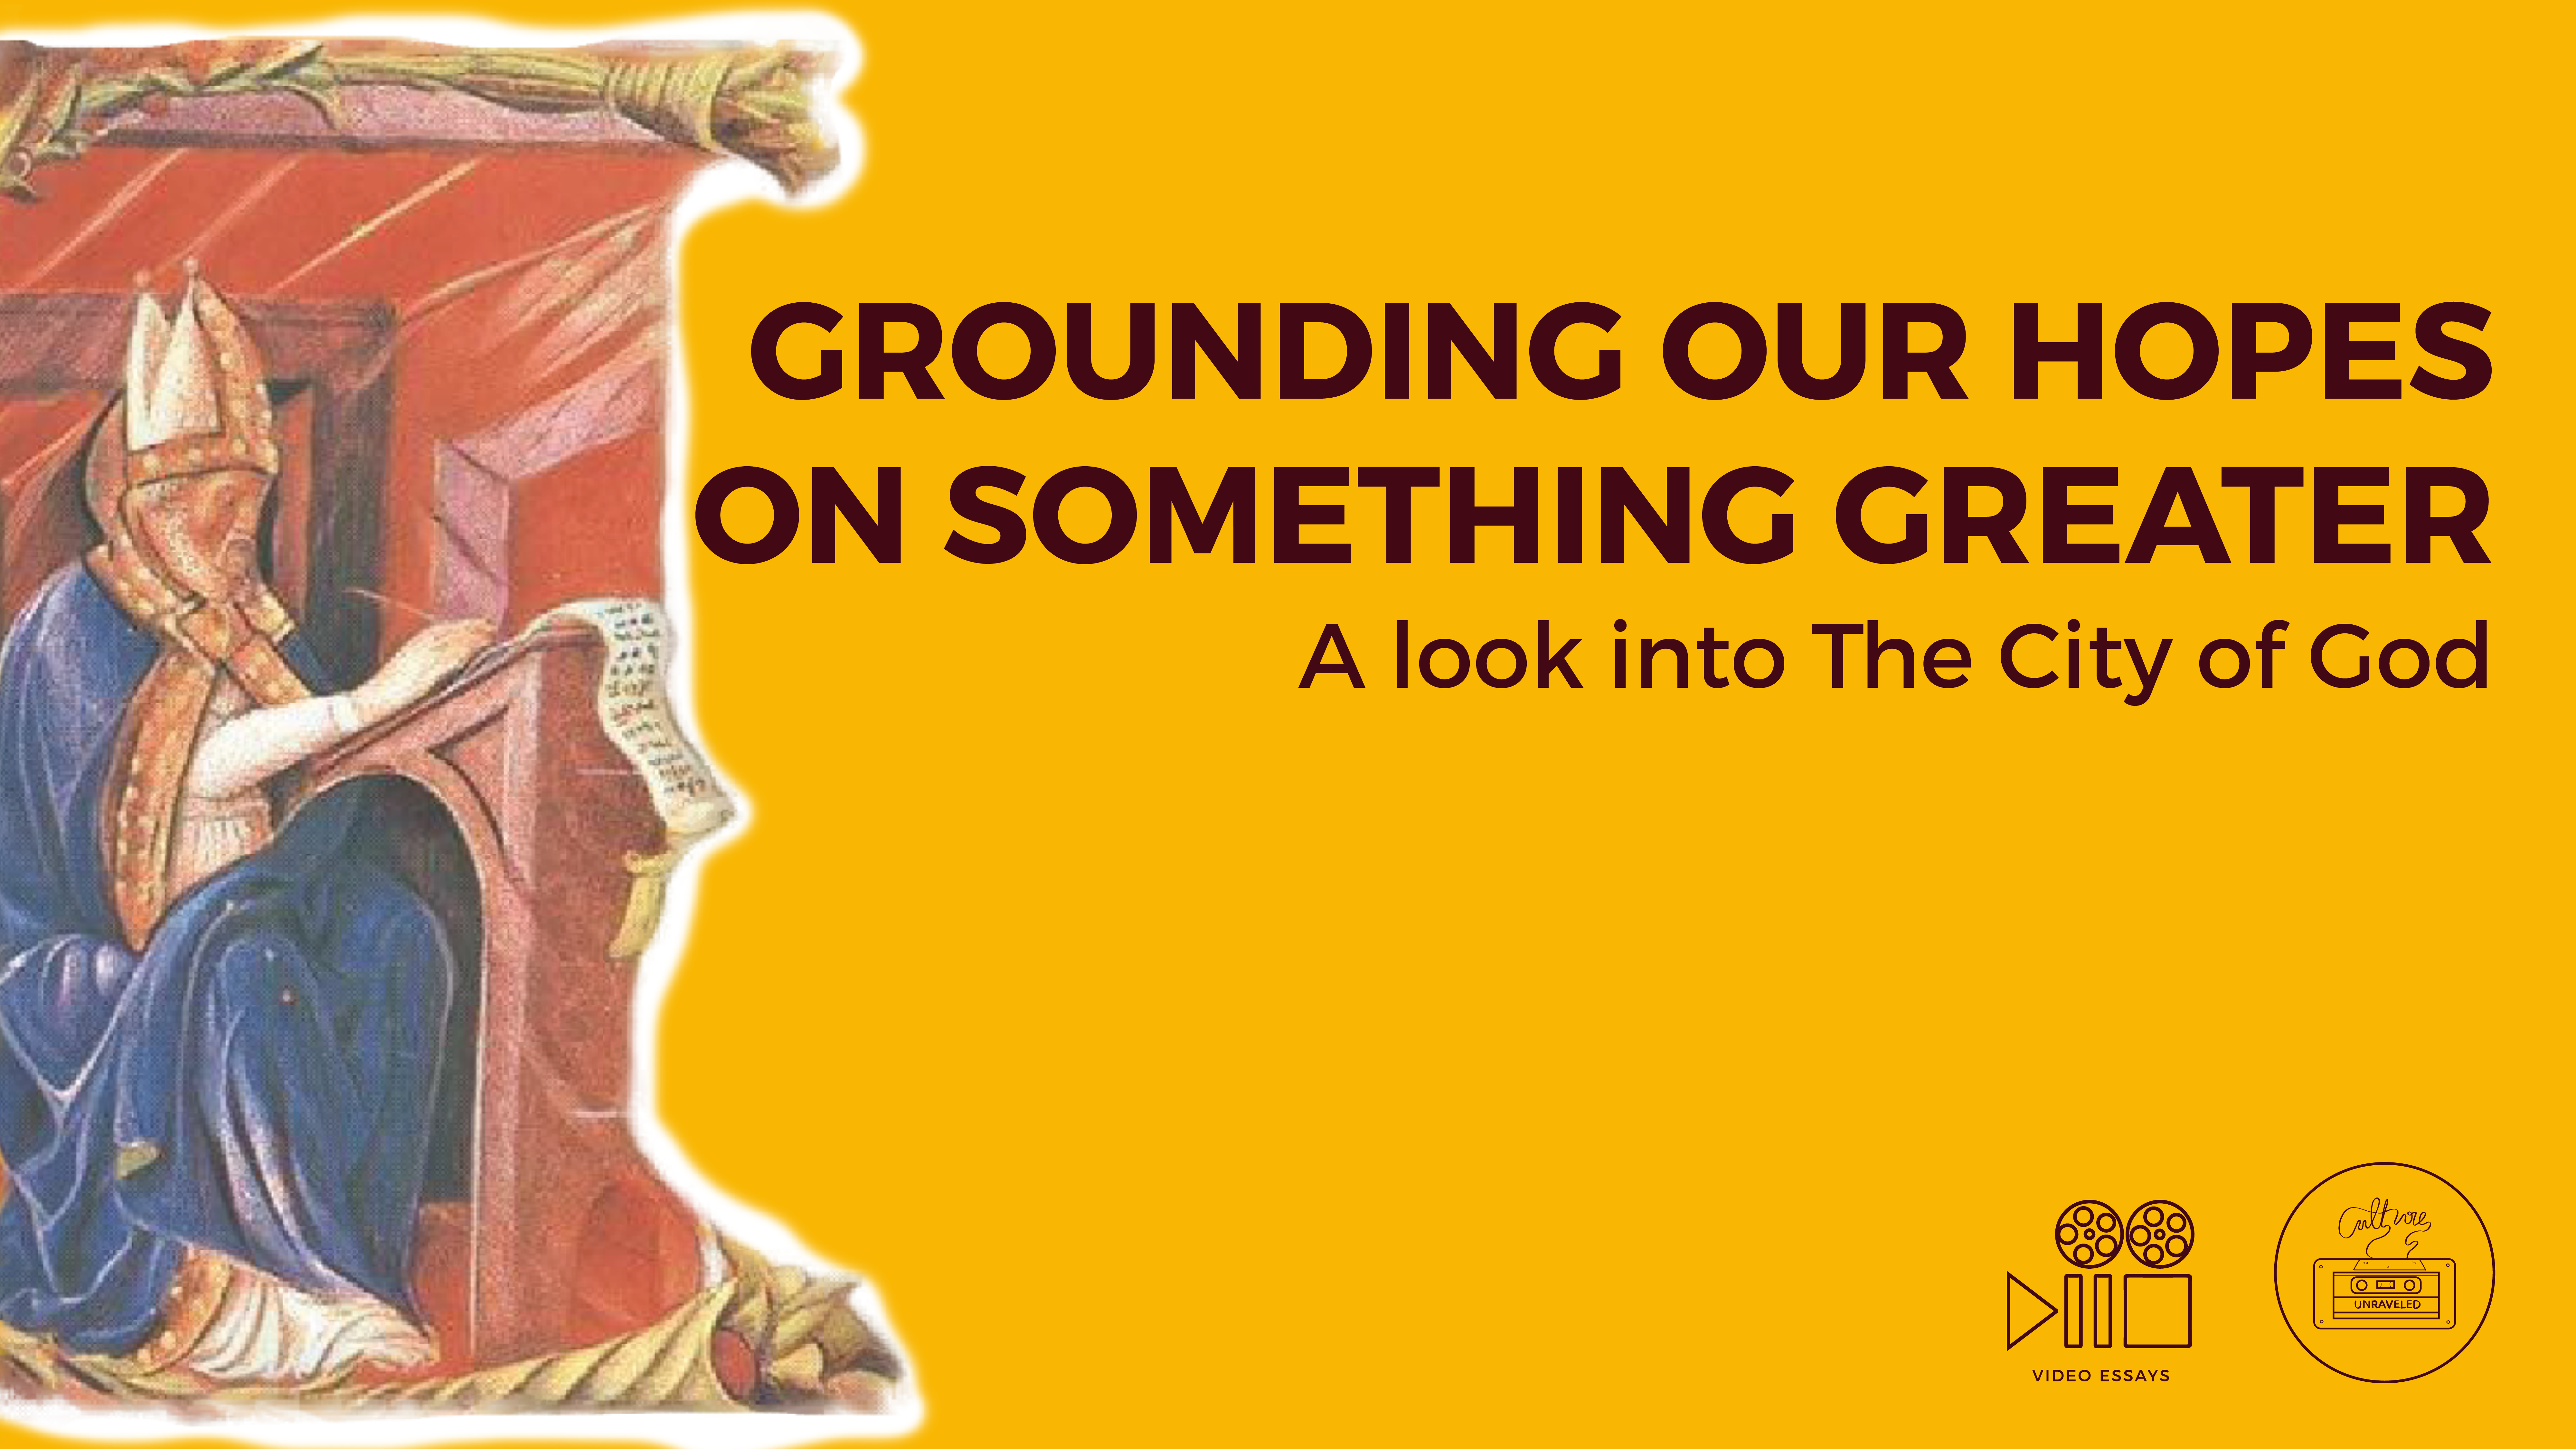 Grounding our Hopes on Something Greater. A Look into The City of God